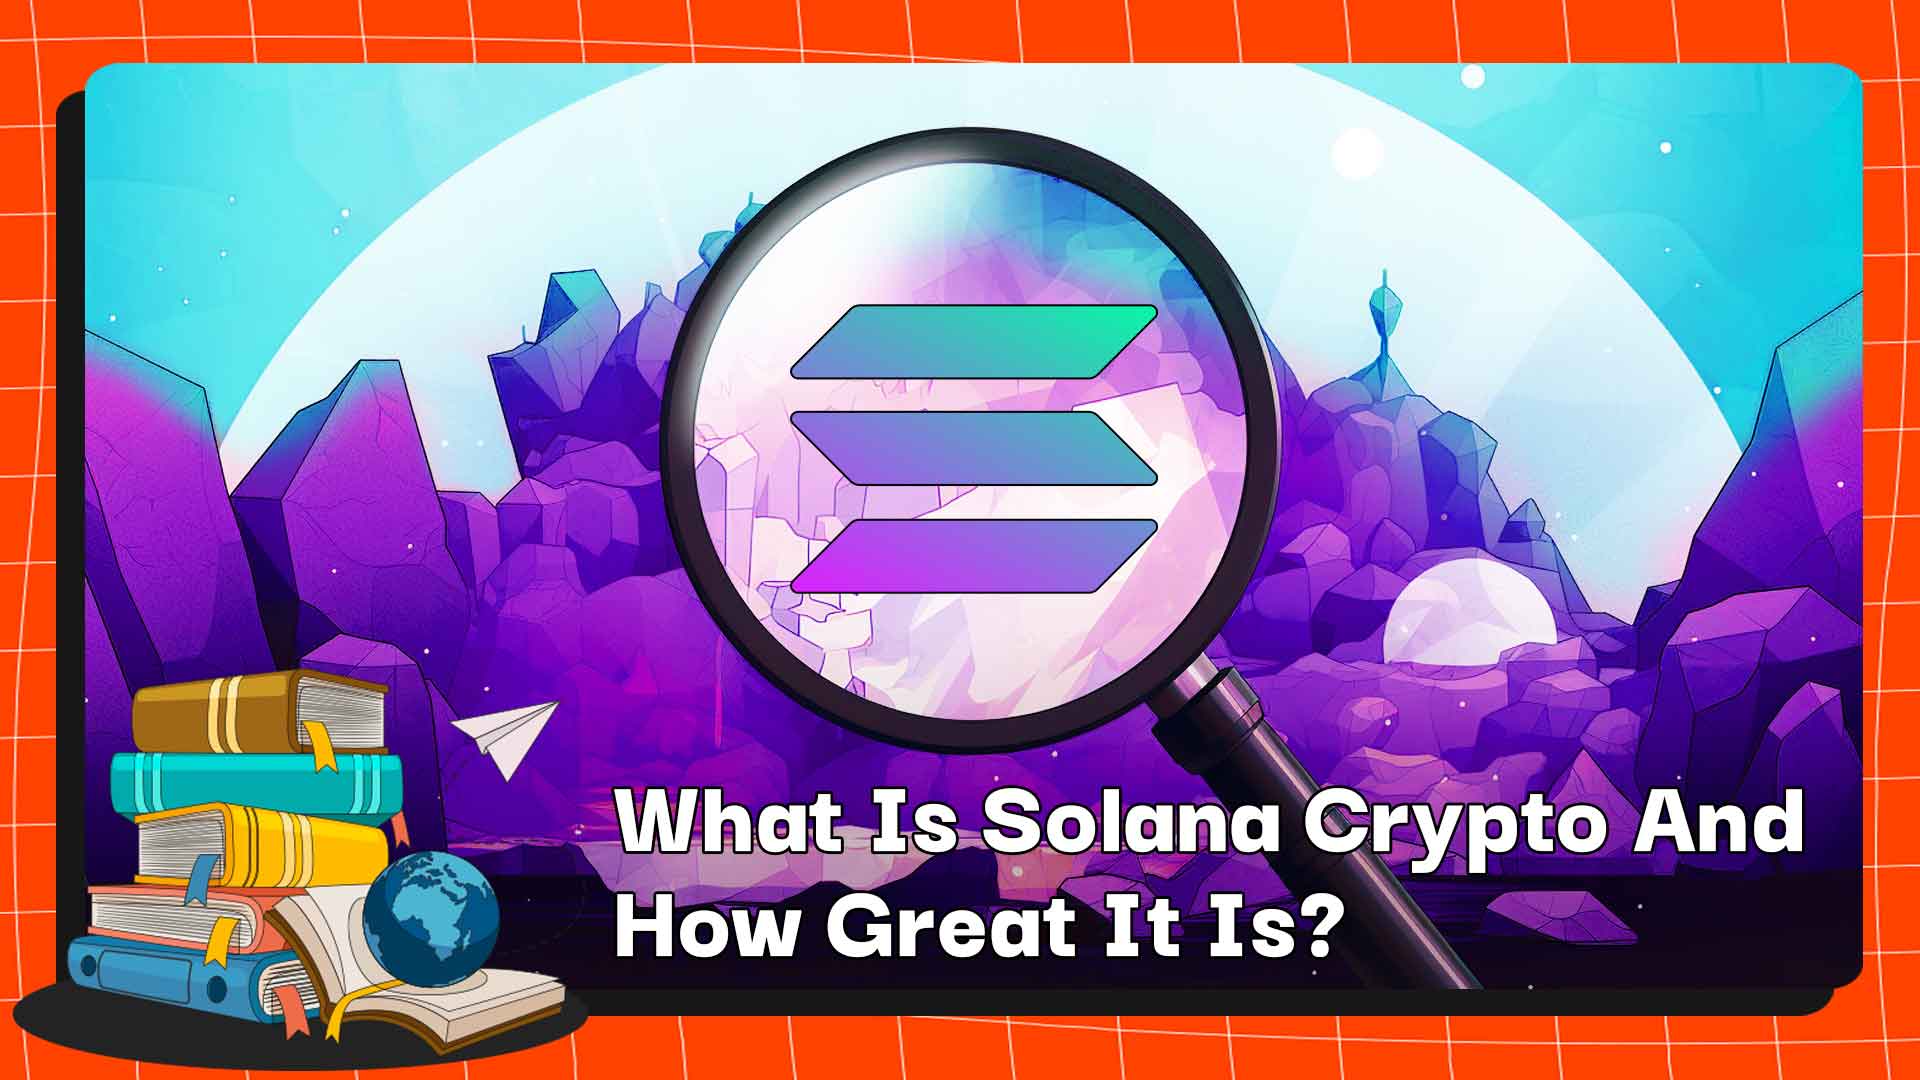 What Is Solana Crypto And How Great It Is?